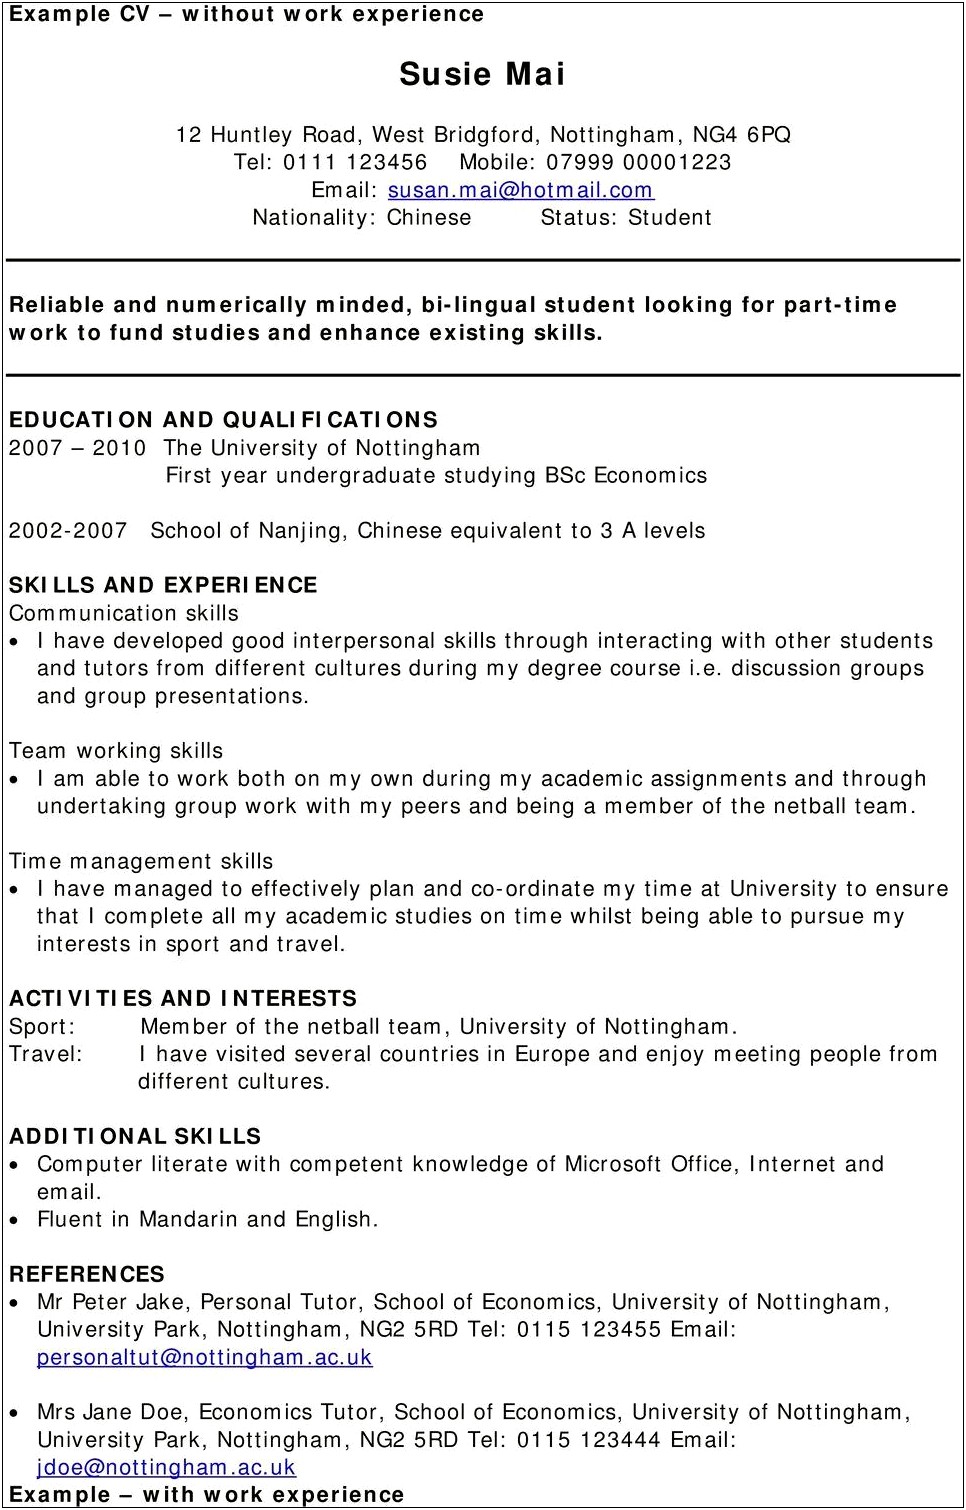 Resume For Part Time Job College Student Skills